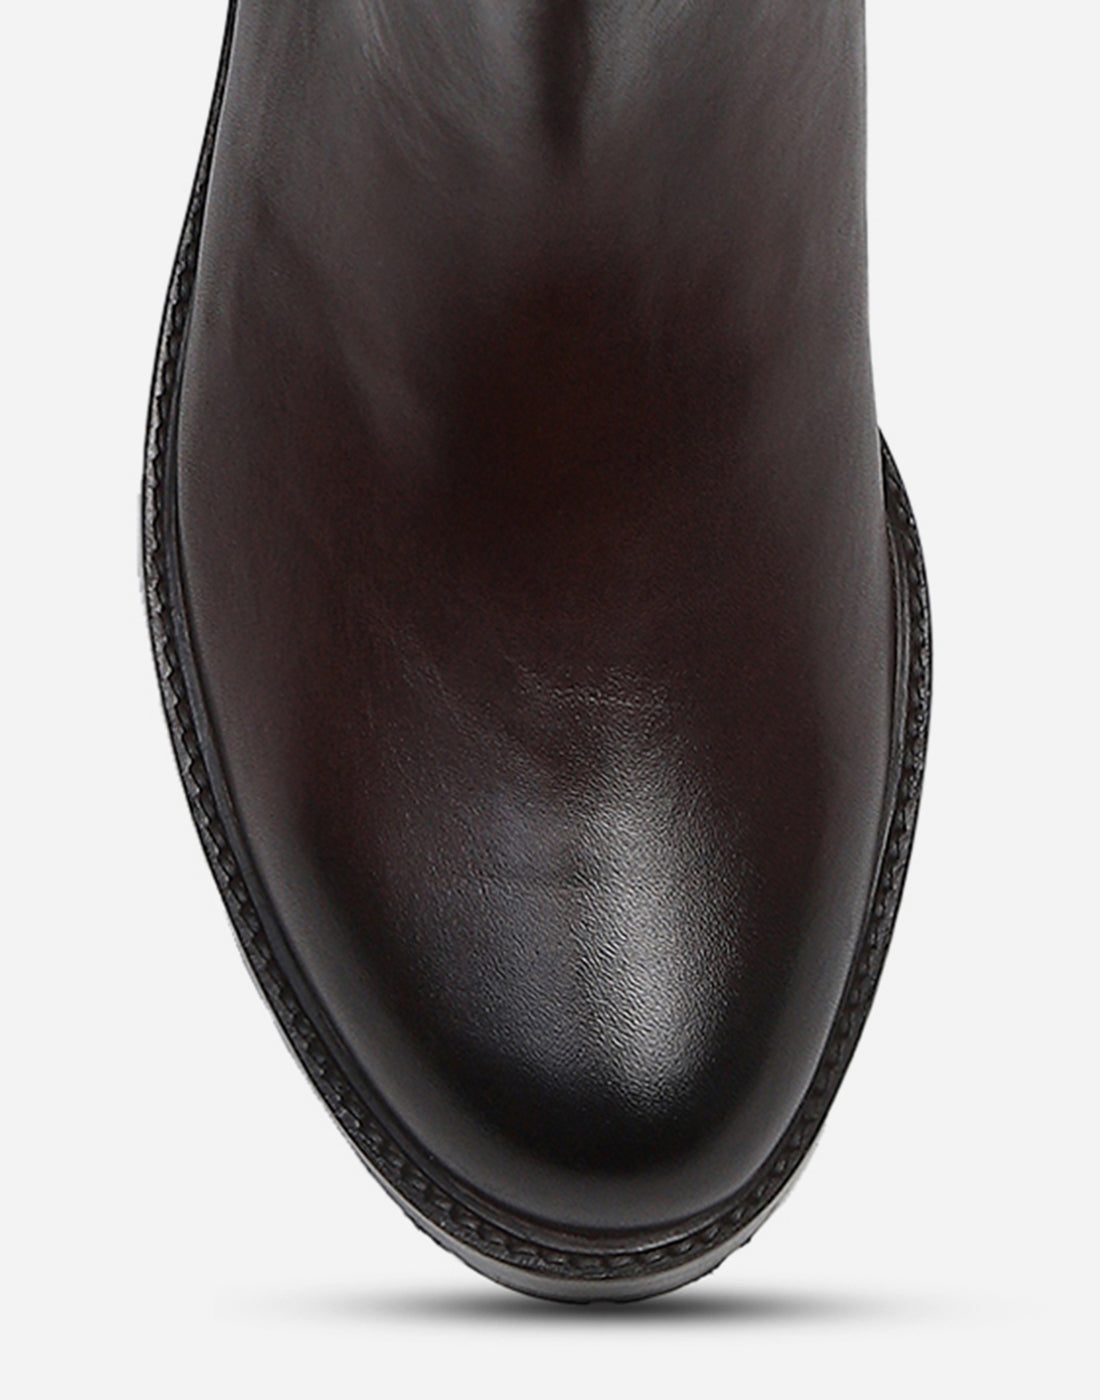 Men Brown Slip on Genuine Leather Chelsea Boots